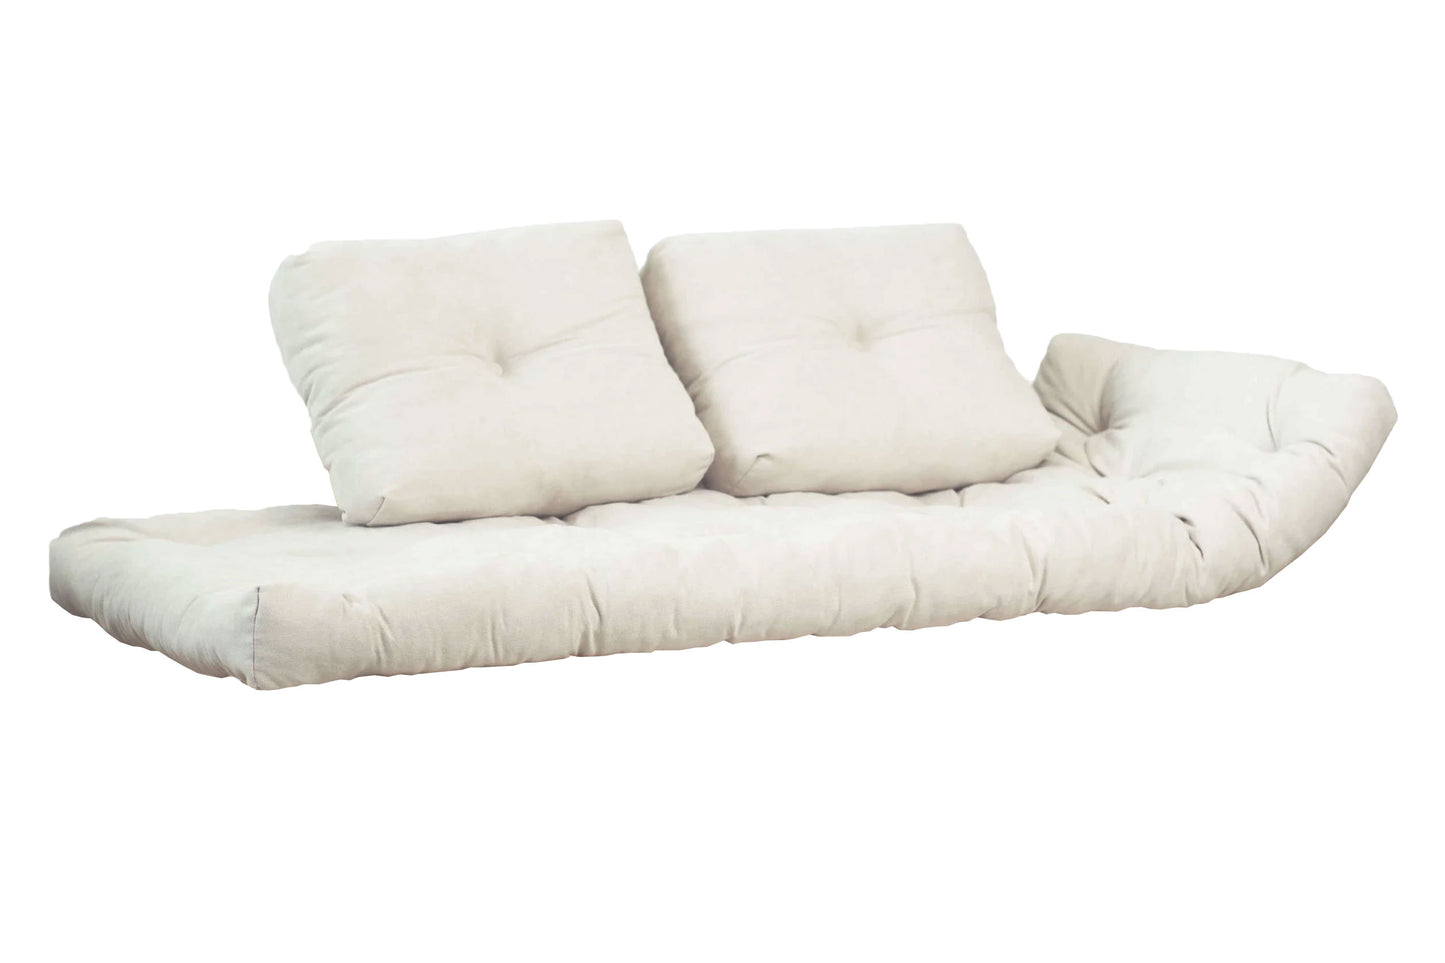 Mattress and Cushions Set for Long Beach Daybed